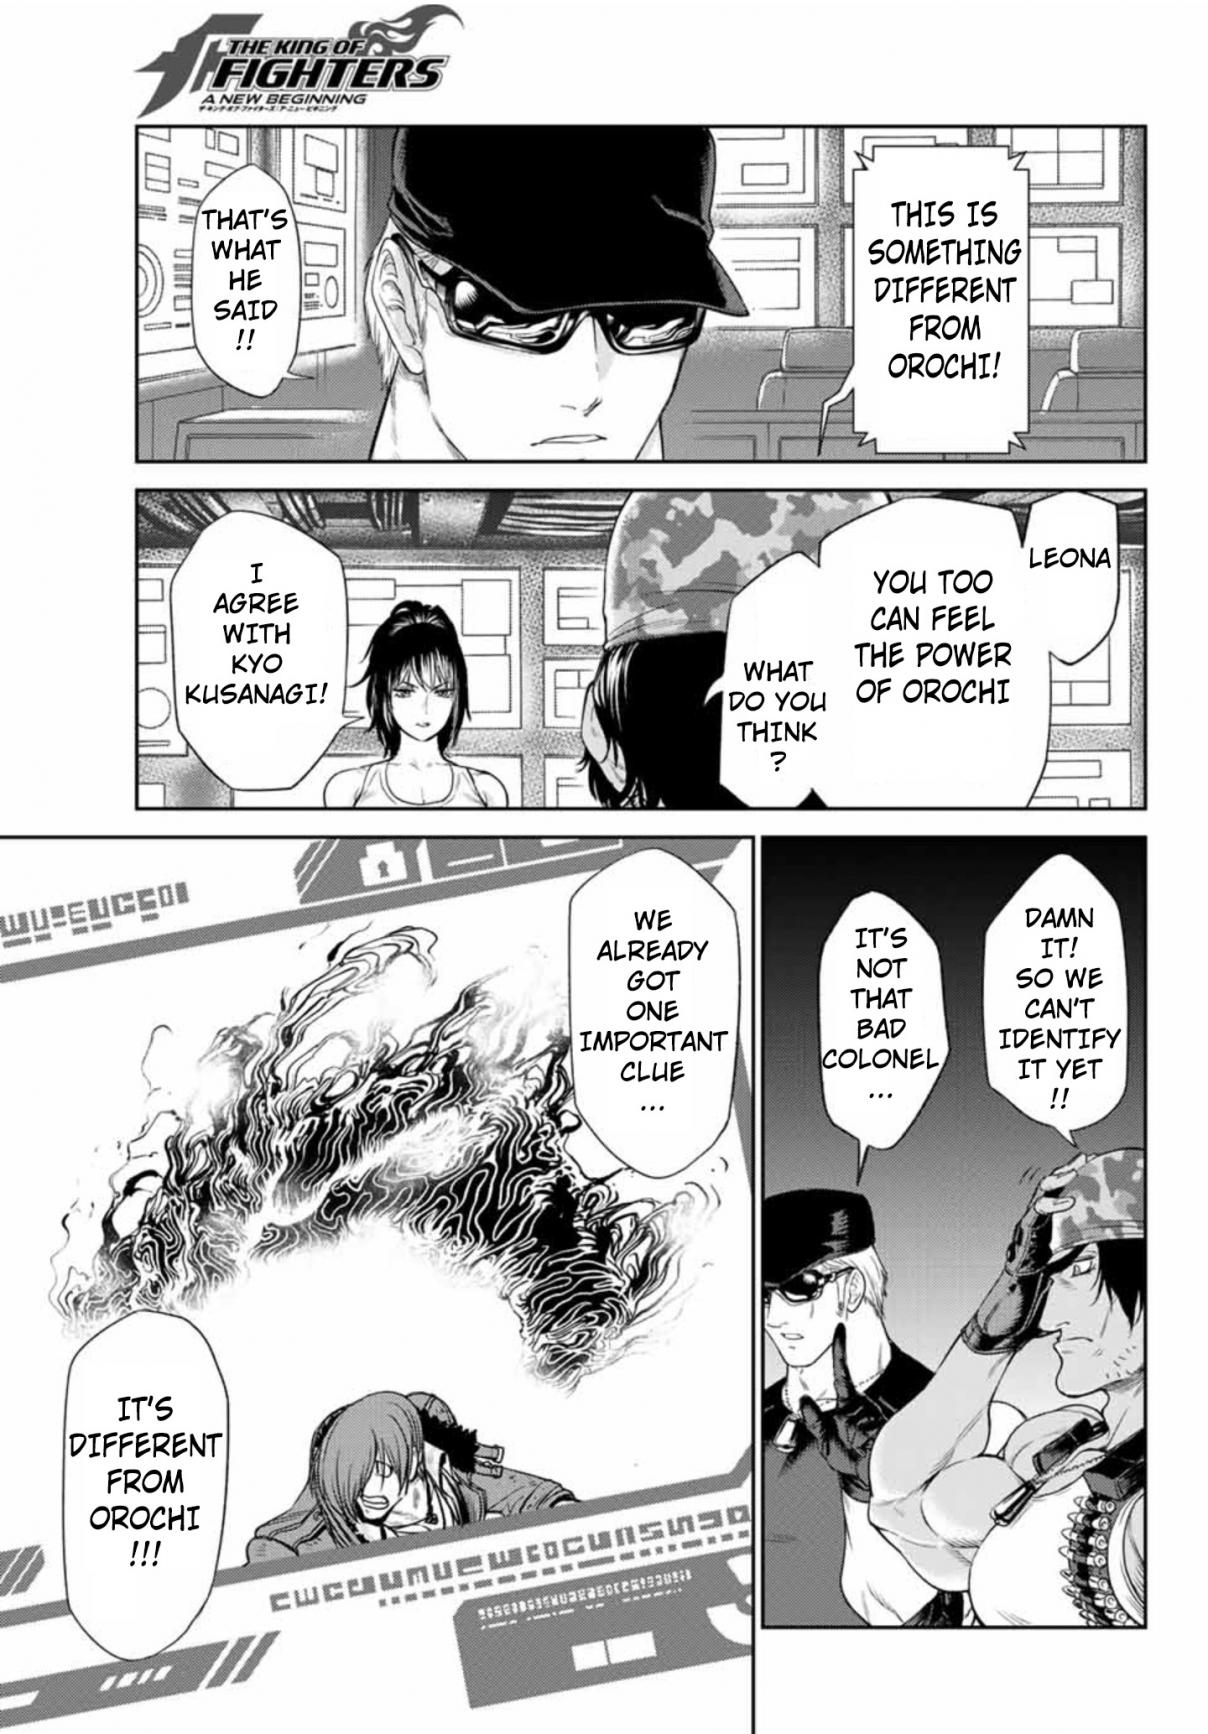 The King of Fighters: A New Beginning Ch. 13.1 Briefing